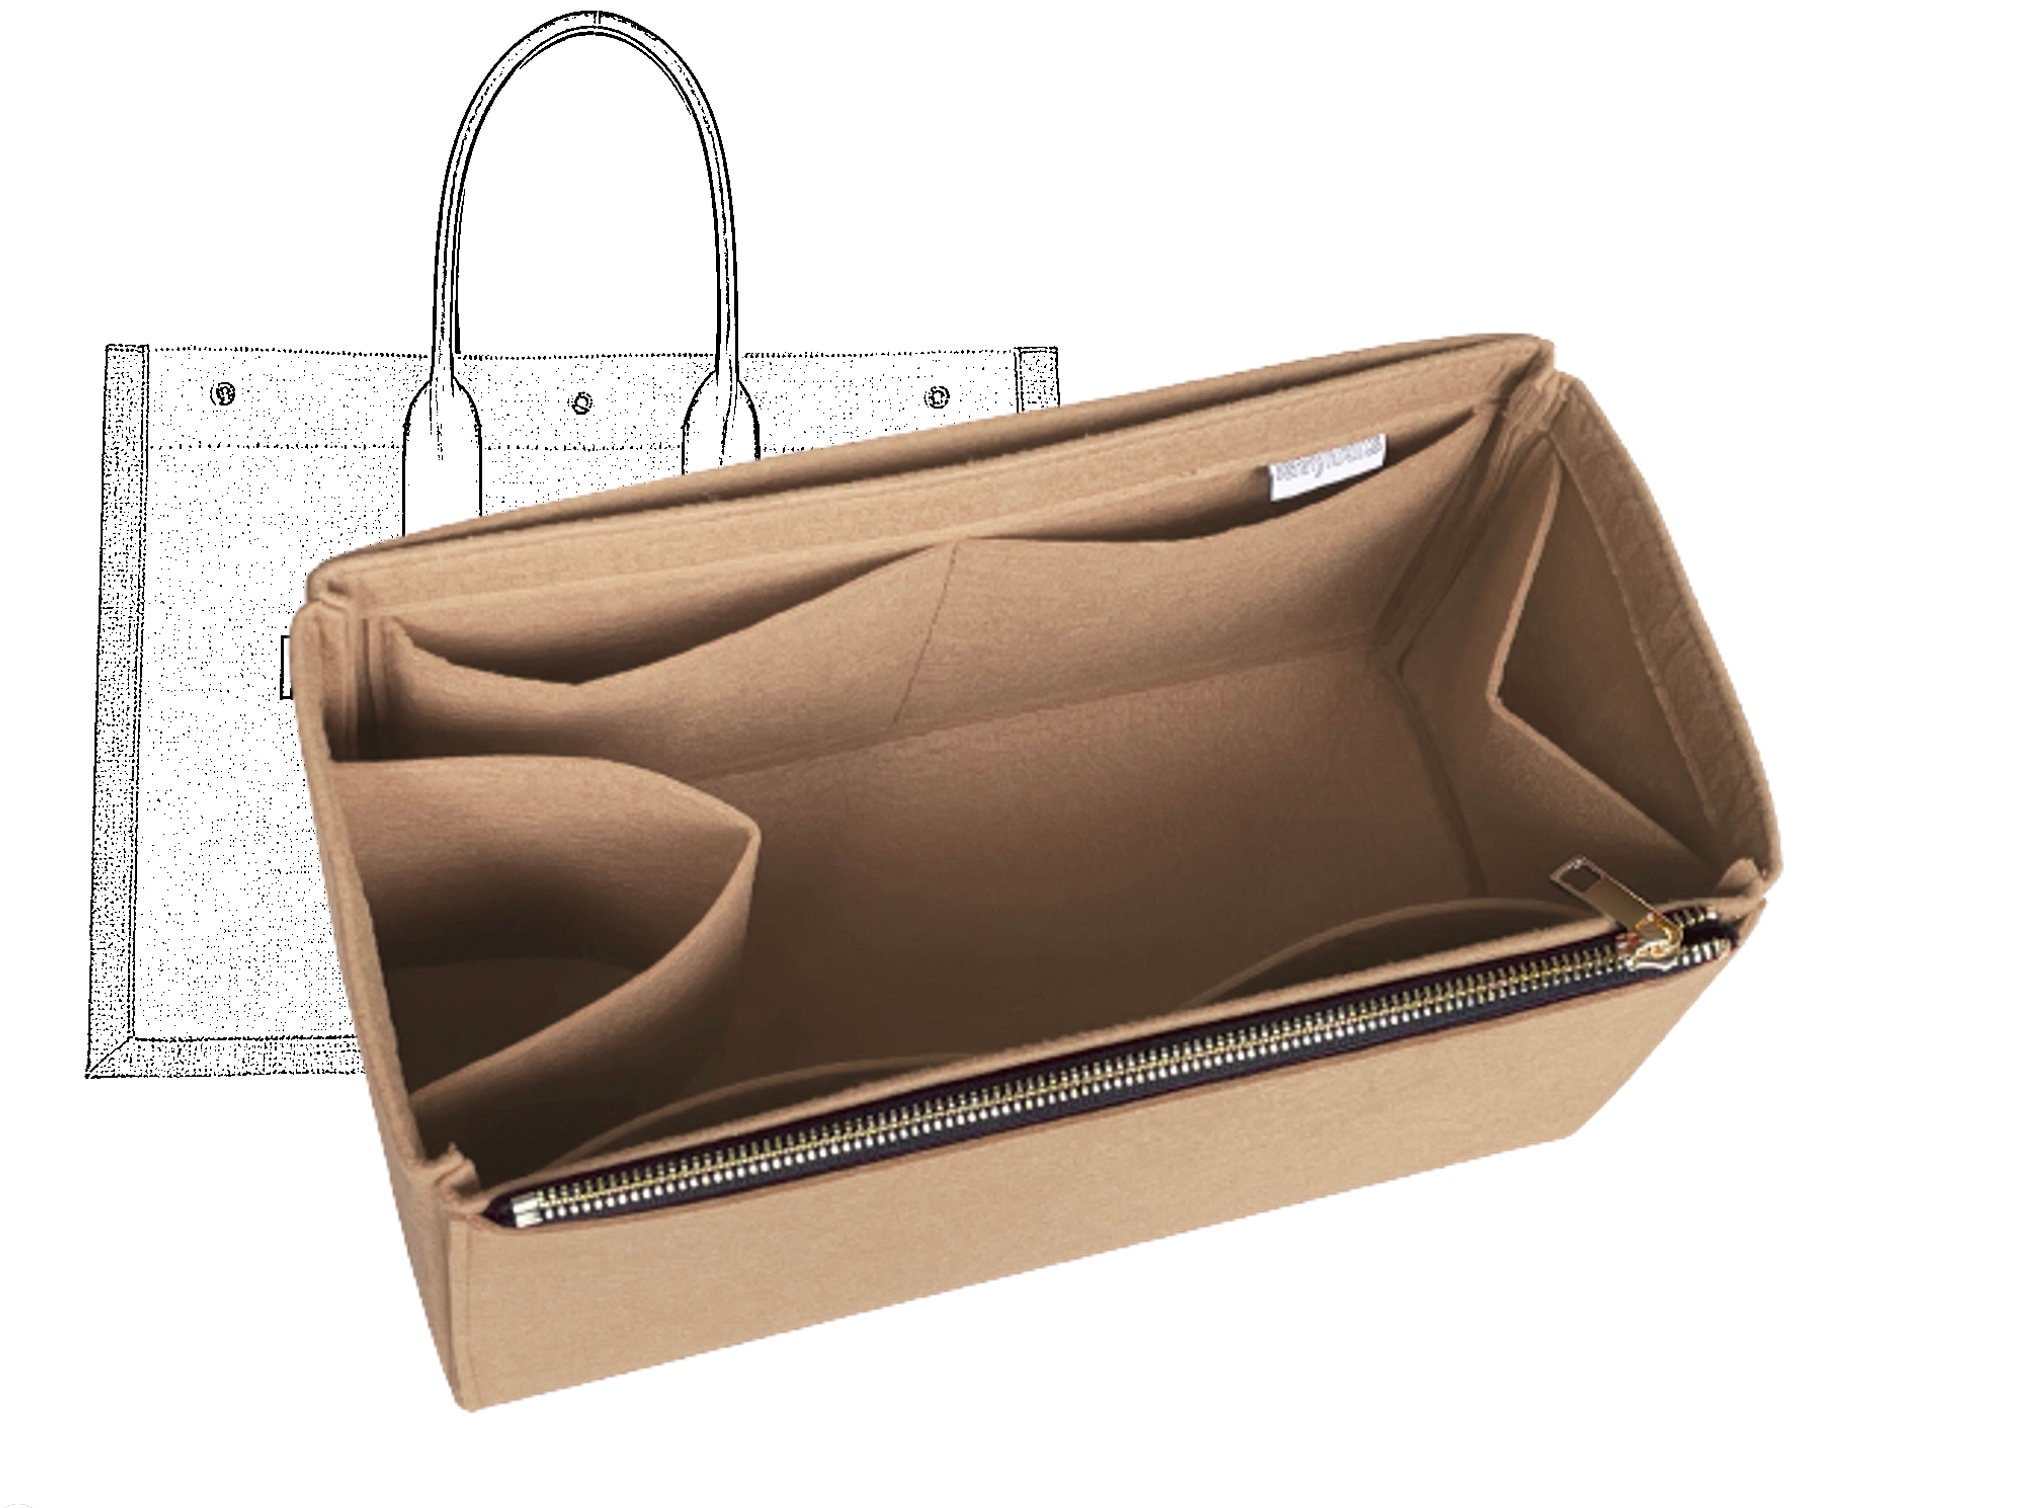 RIVE GAUCHE TOTE BAG IN LINEN AND LEATHER - WBY16 - We Replica